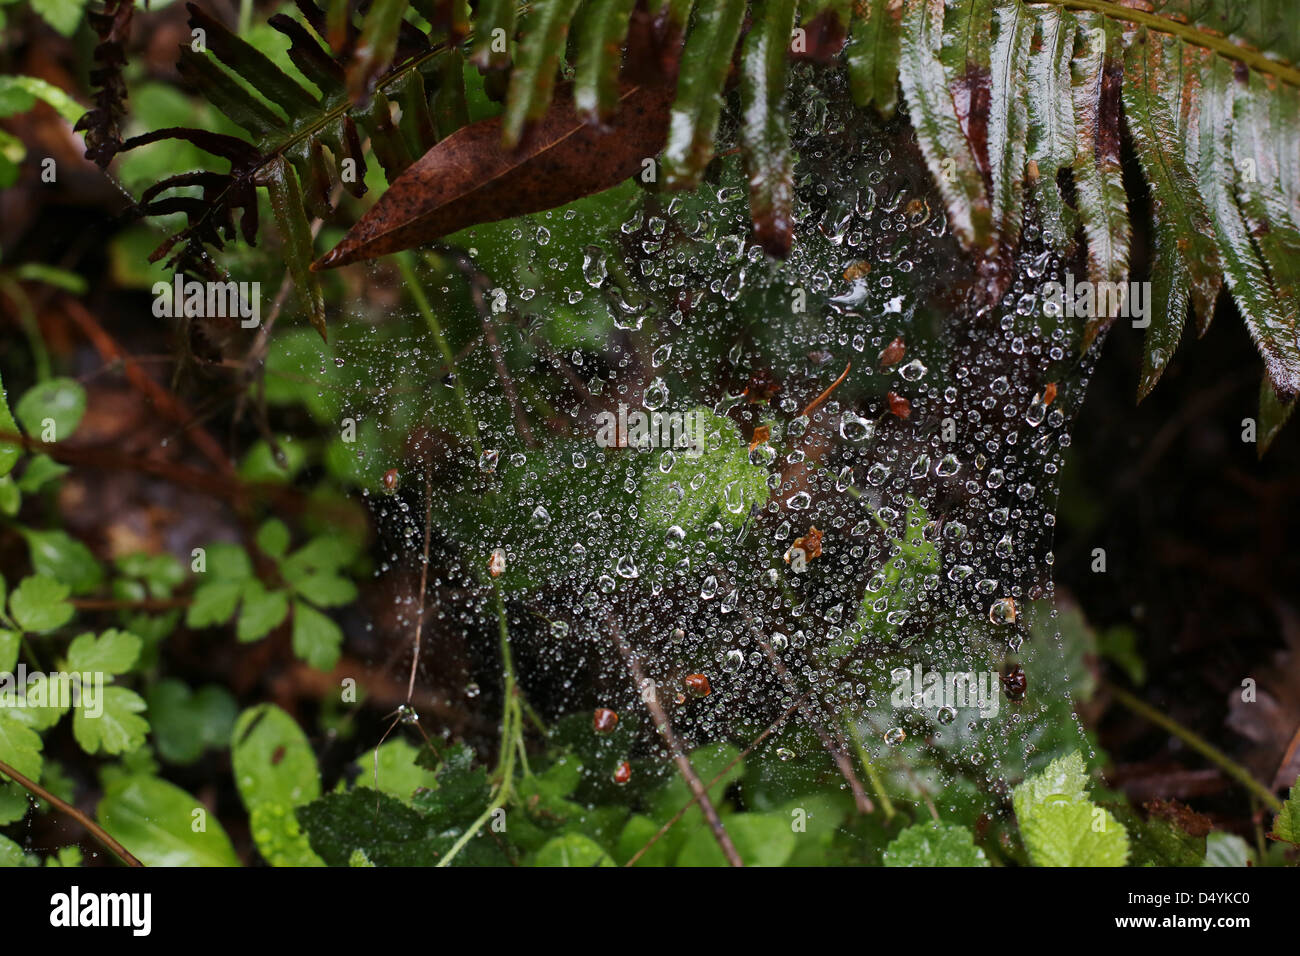 A spider web covered in rain drops. Stock Photo